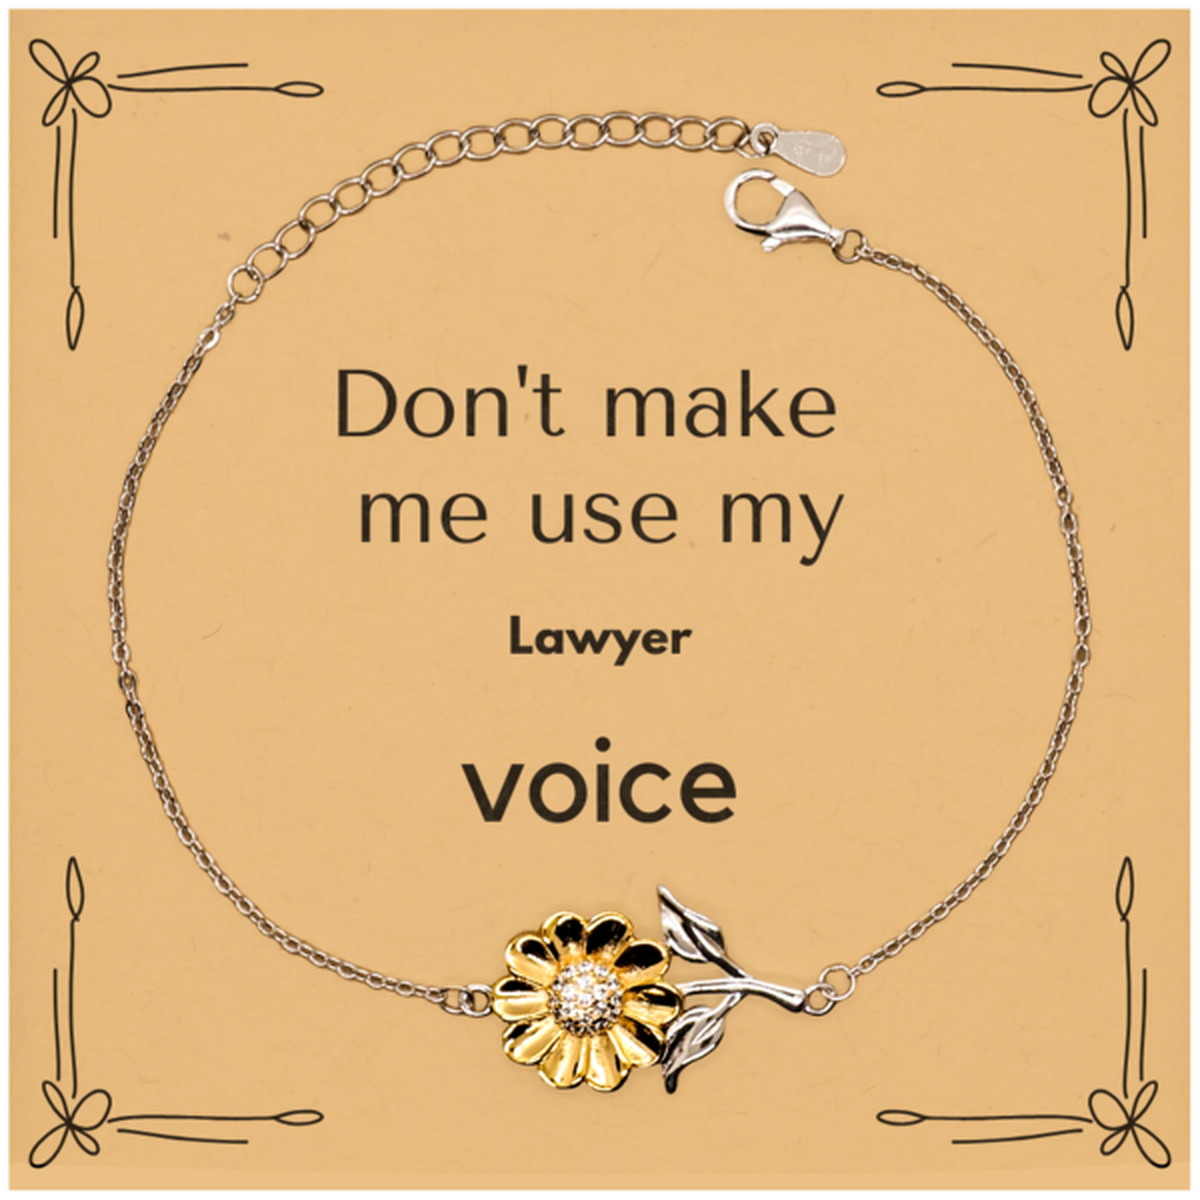 Don't make me use my Lawyer voice, Sarcasm Lawyer Card Gifts, Christmas Lawyer Sunflower Bracelet Birthday Unique Gifts For Lawyer Coworkers, Men, Women, Colleague, Friends